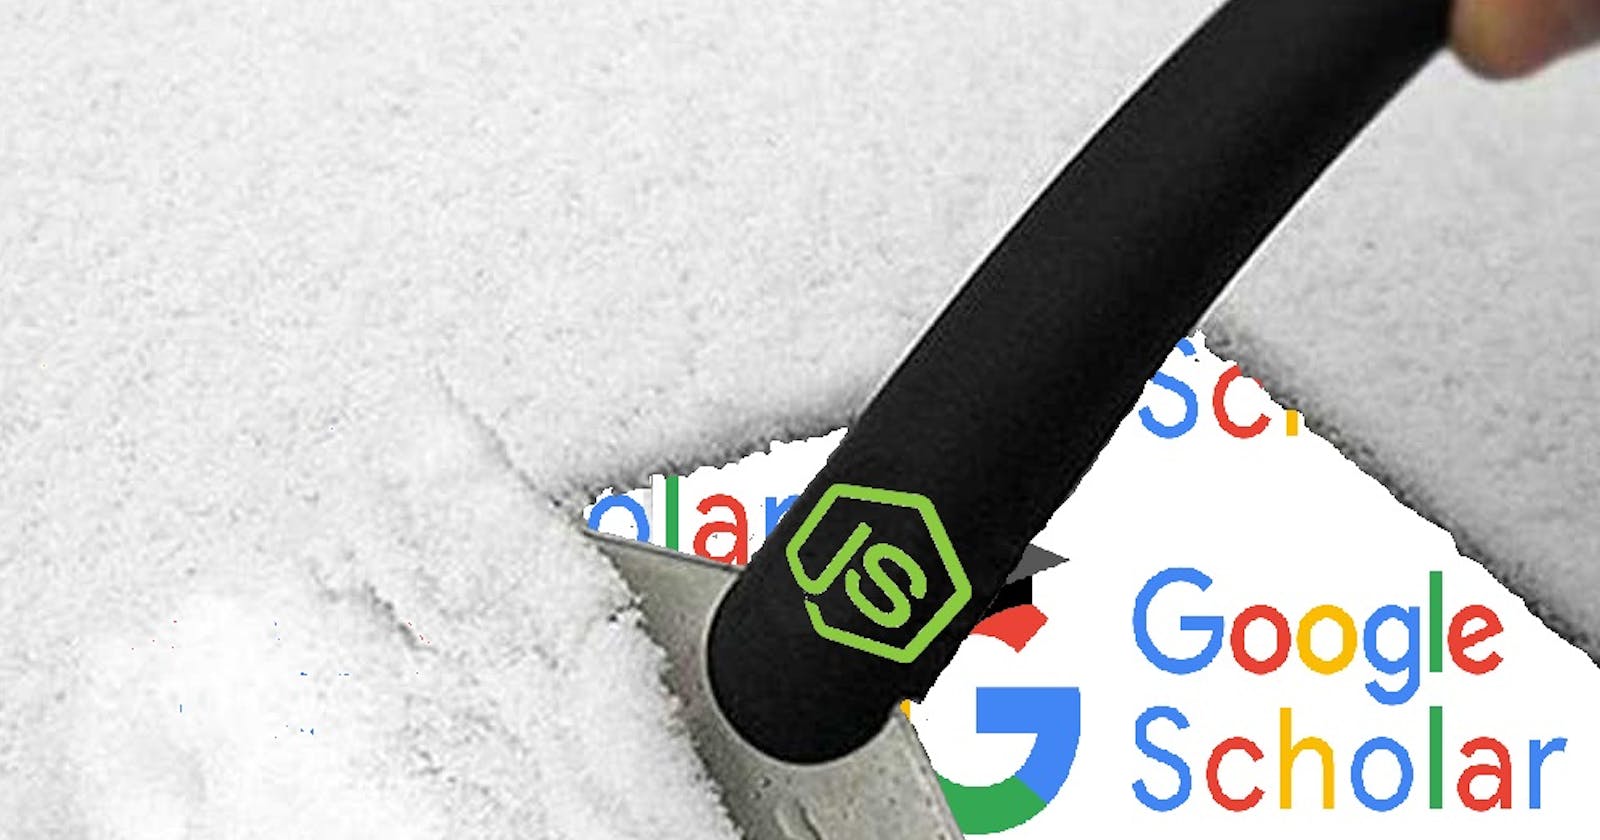 How to scrape Google Scholar organic results with Node.js